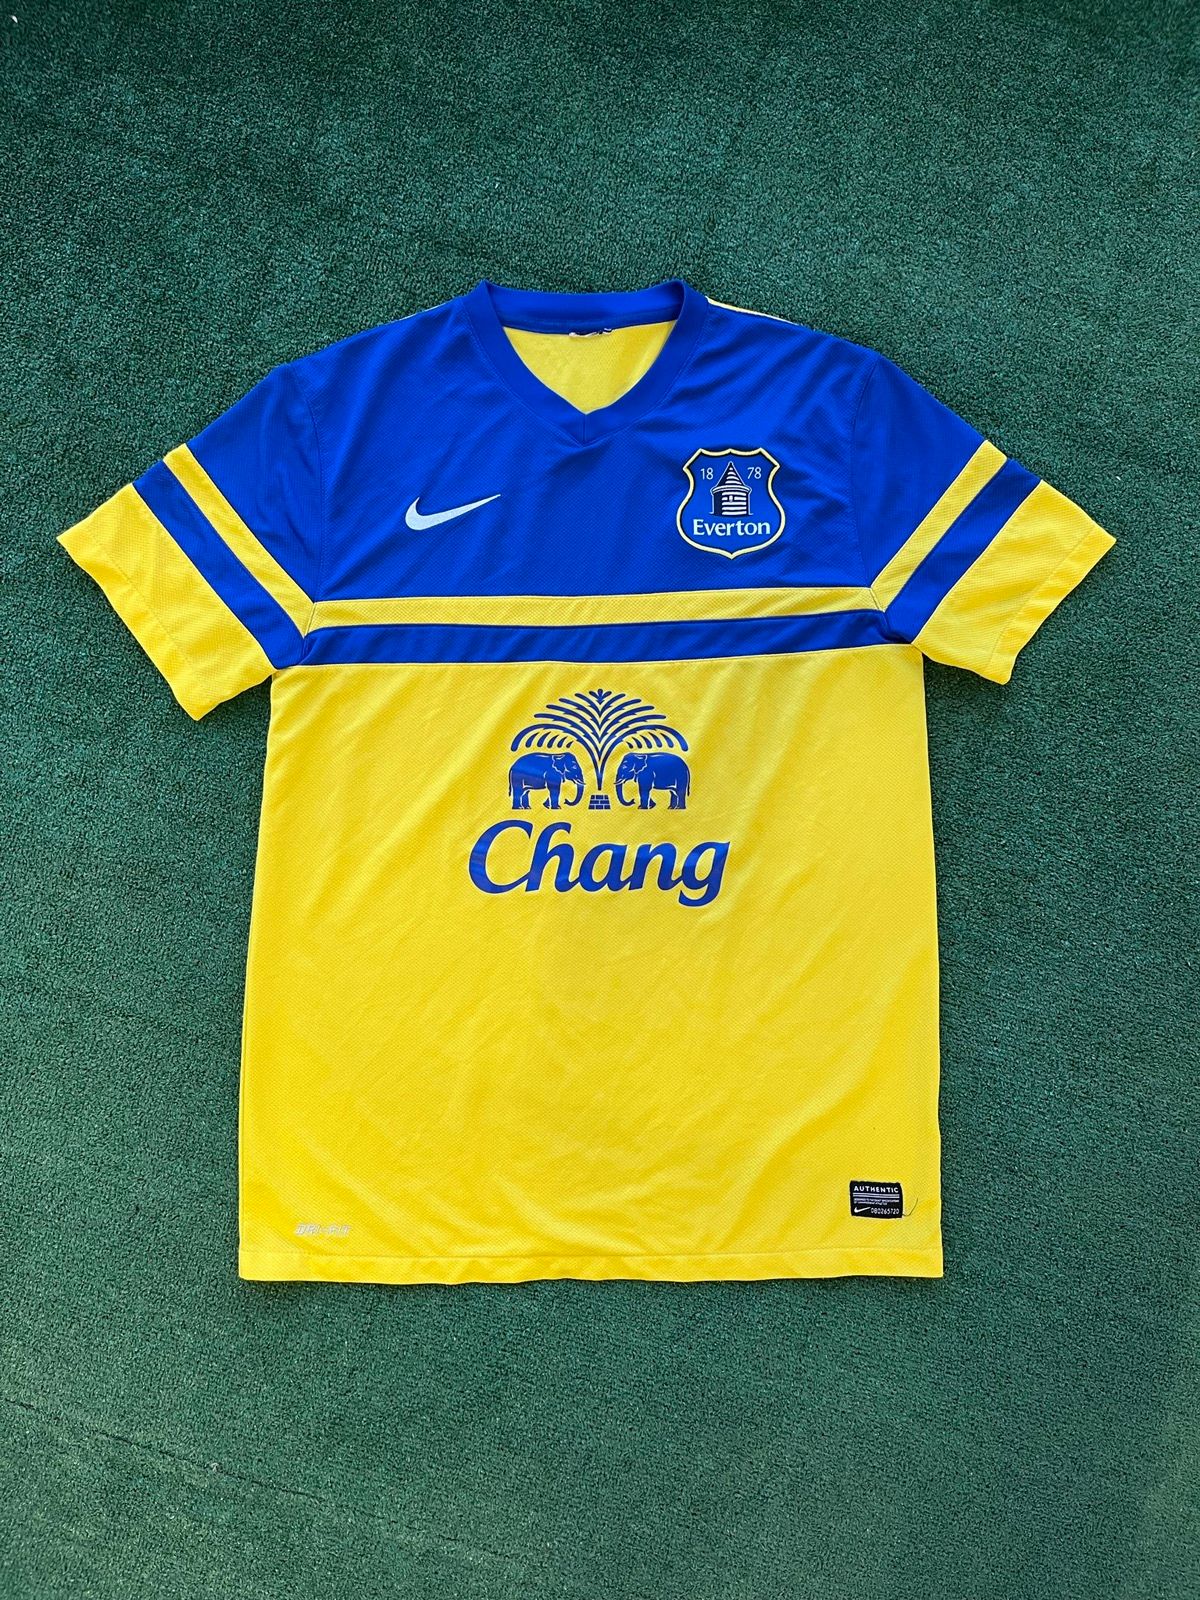 Pre-owned Jersey X Nike Vintage Nike Blokecore Everton Jersey Drill Y2k Home Shirt In Blue/yellow